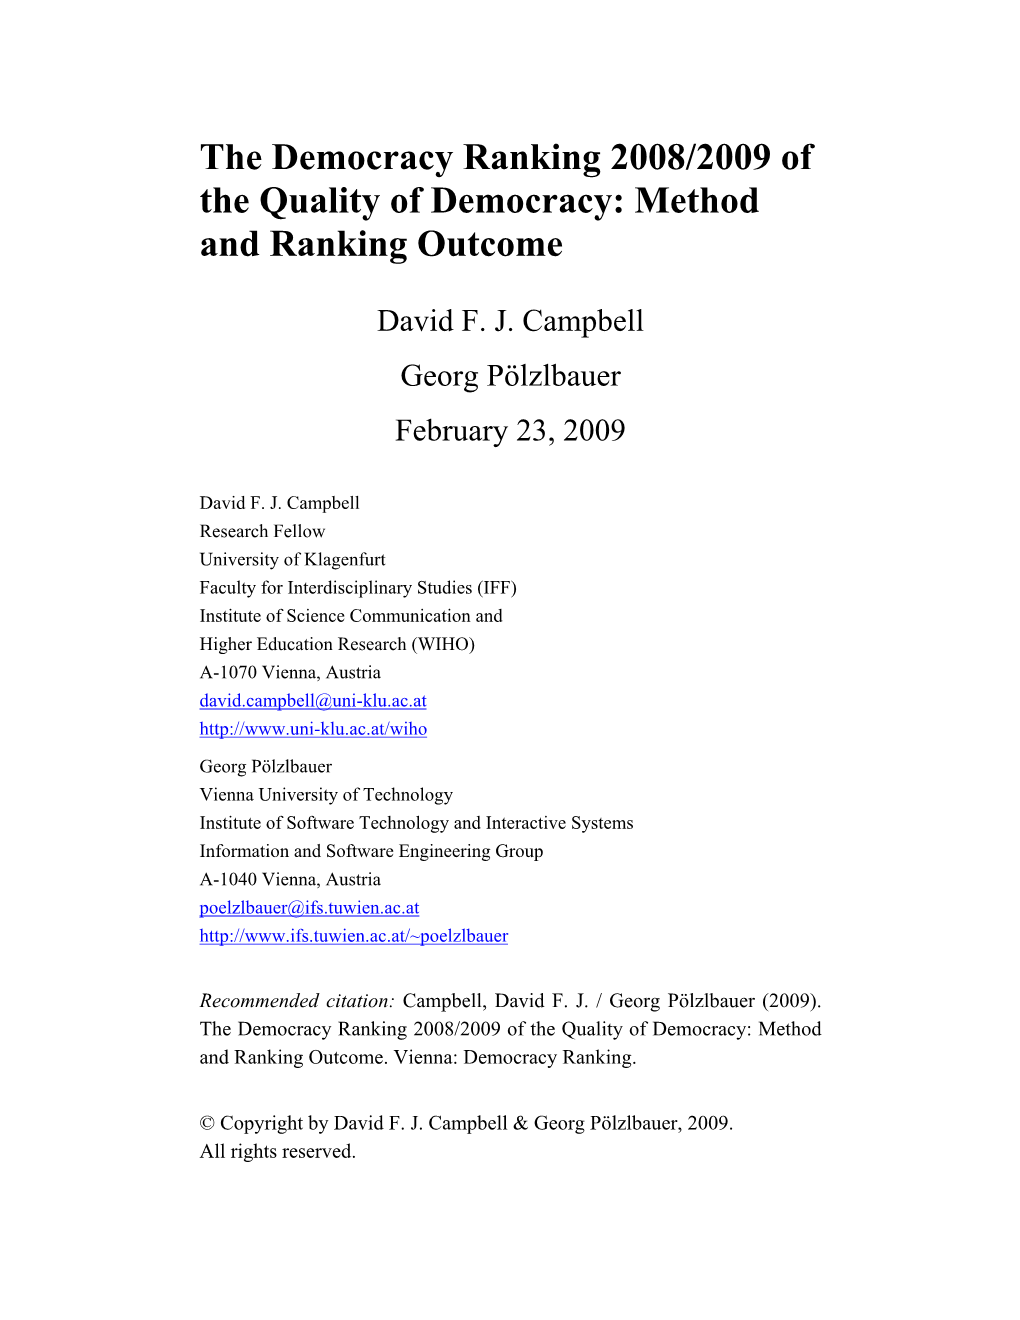 Democracy Ranking 2008/2009: Method and Outcome